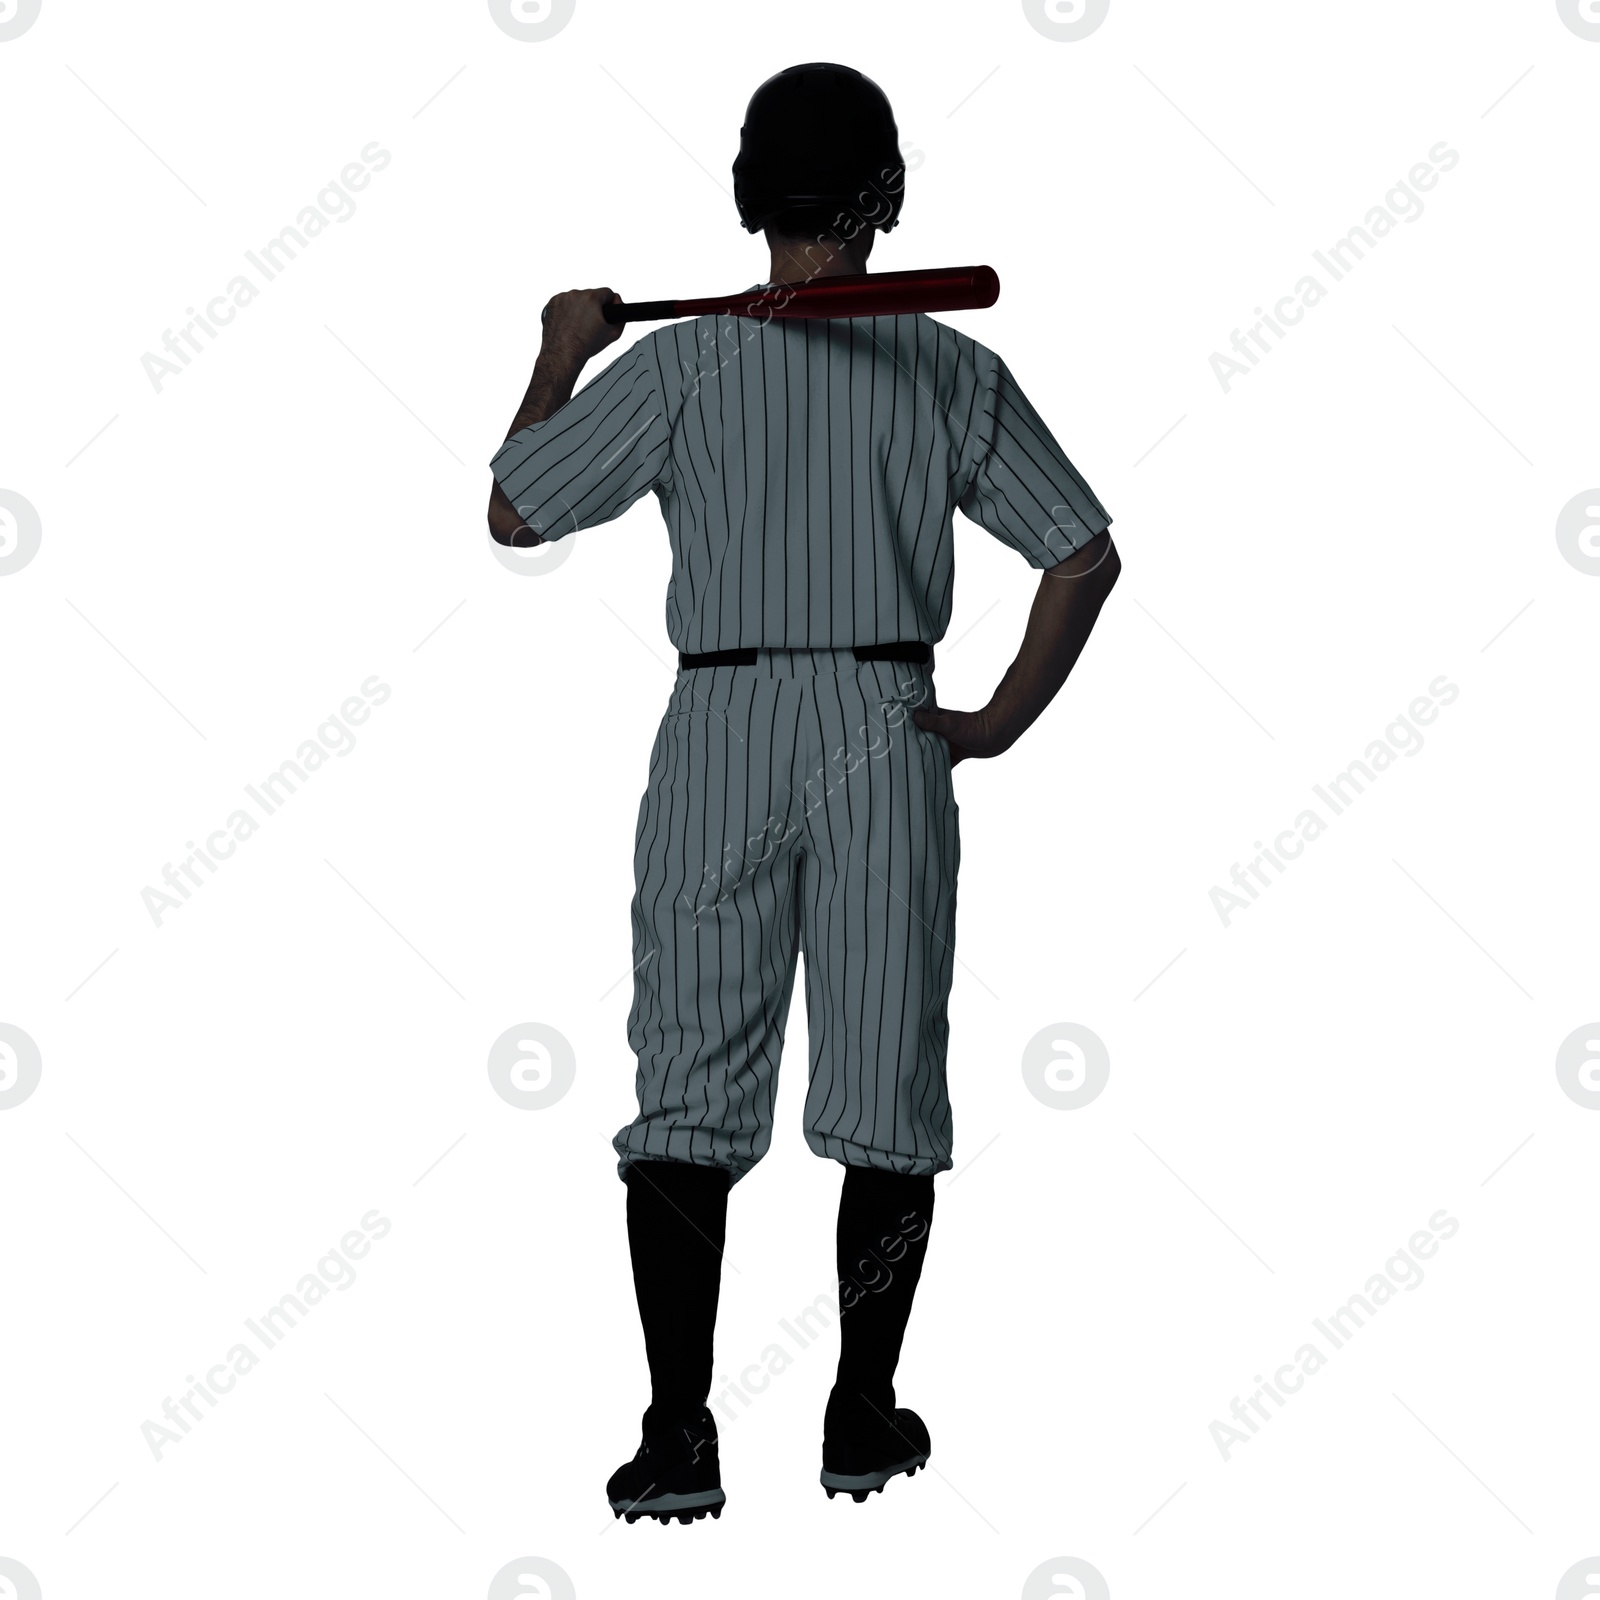 Image of Silhouette of baseball player on white background, back view